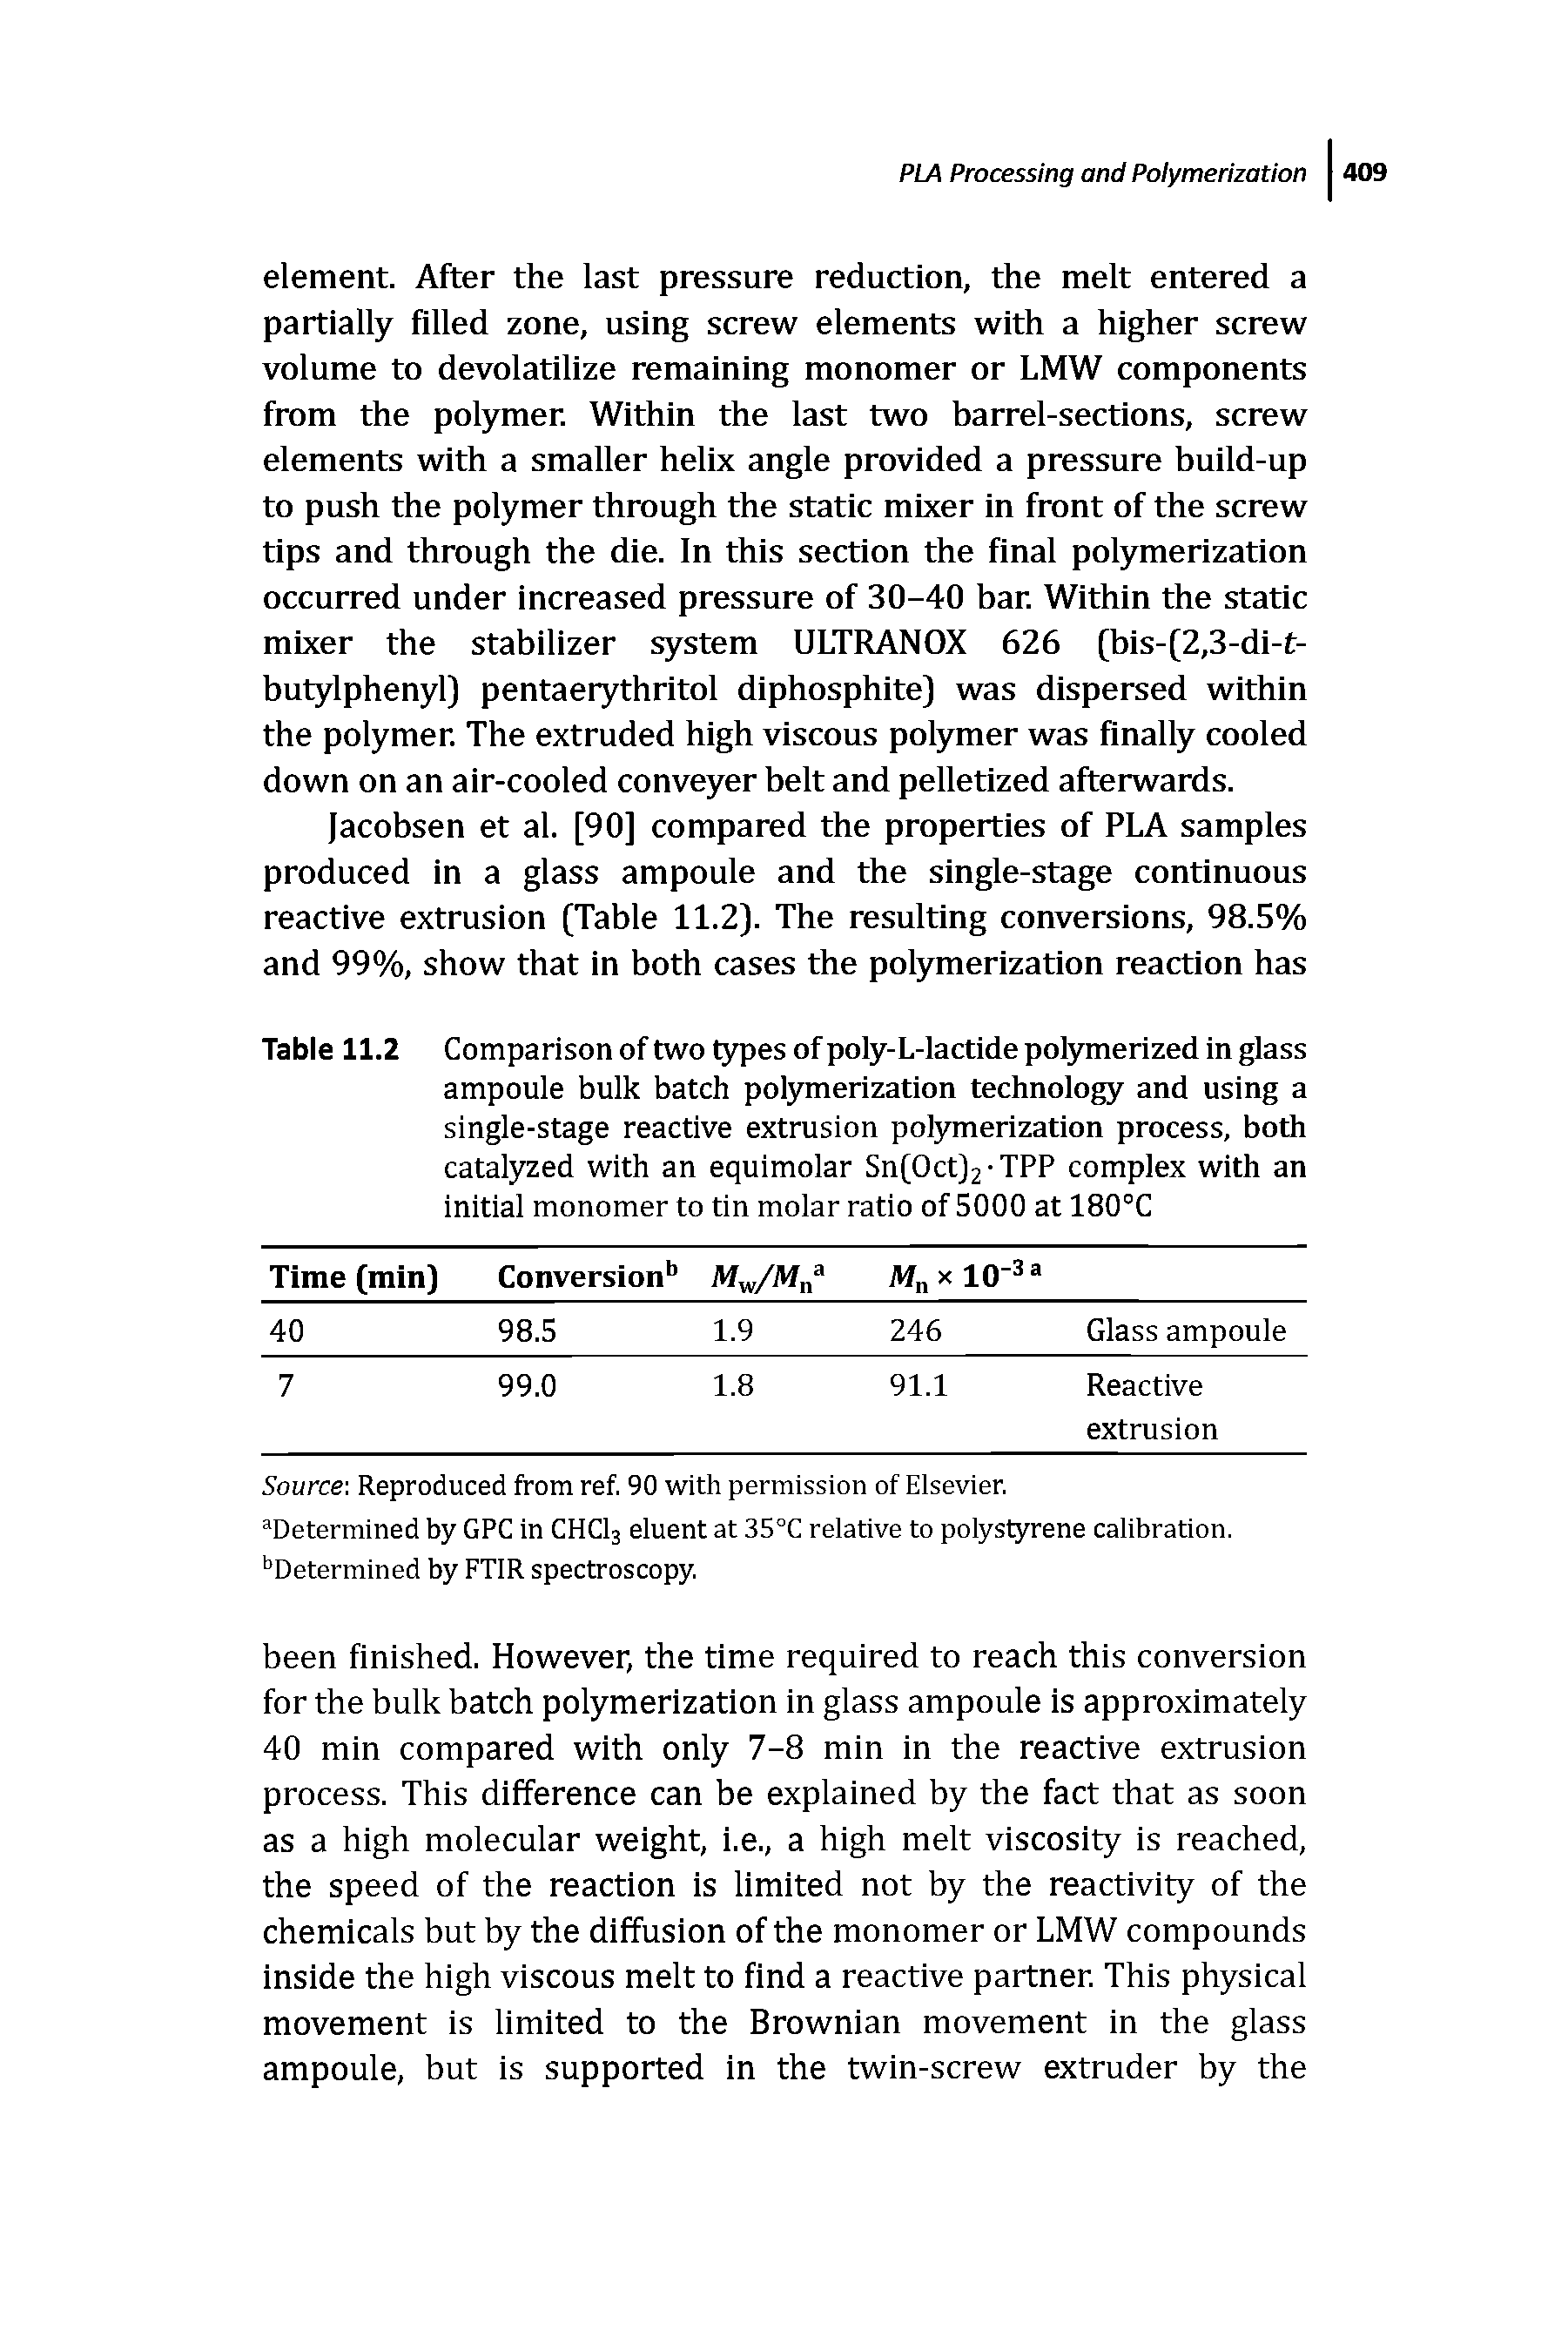 Table 11.2 Comparison of two types of poly-L-lactide potymerized in glass ampoule bulk batch polymerization technology and using a single-stage reactive extrusion potymerization process, both catalyzed with an equimolar Sn(0ct]2 TPP complex with an initial monomer to tin molar ratio of 5000 at 180°C...